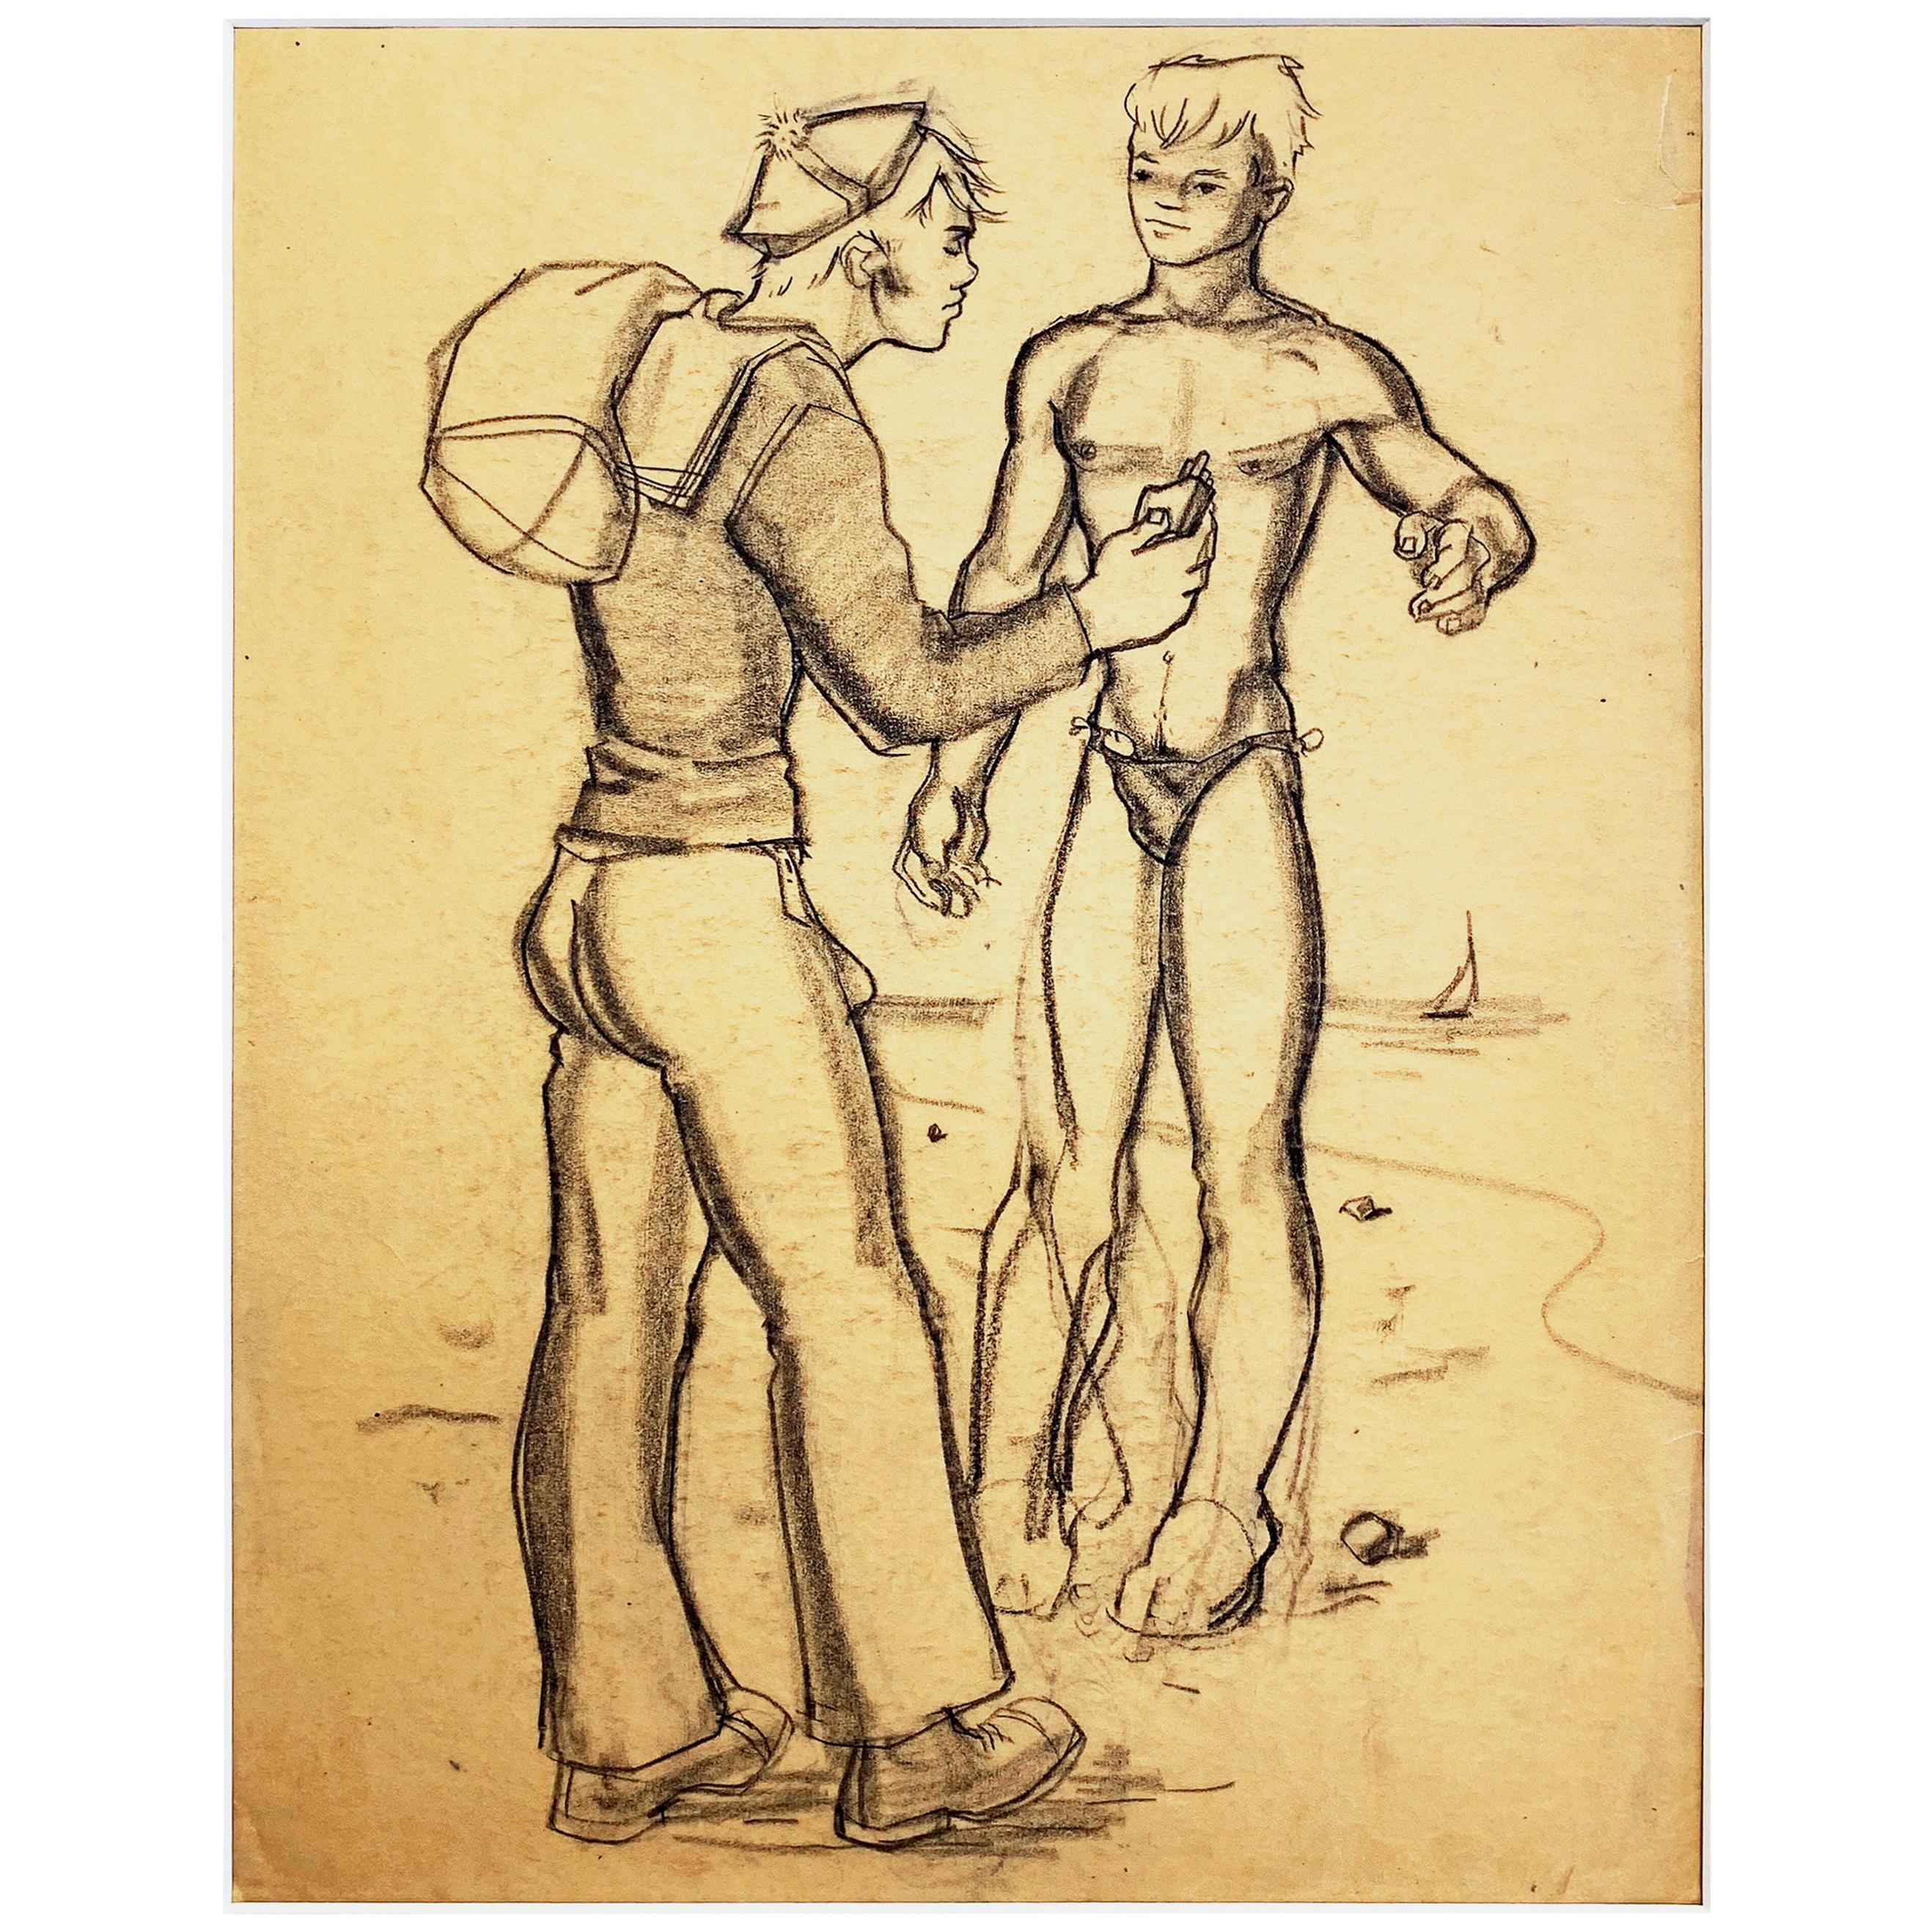 "On the Beach, " Drawing of Sailor and Swimmer by Avel deKnight, Black Artist